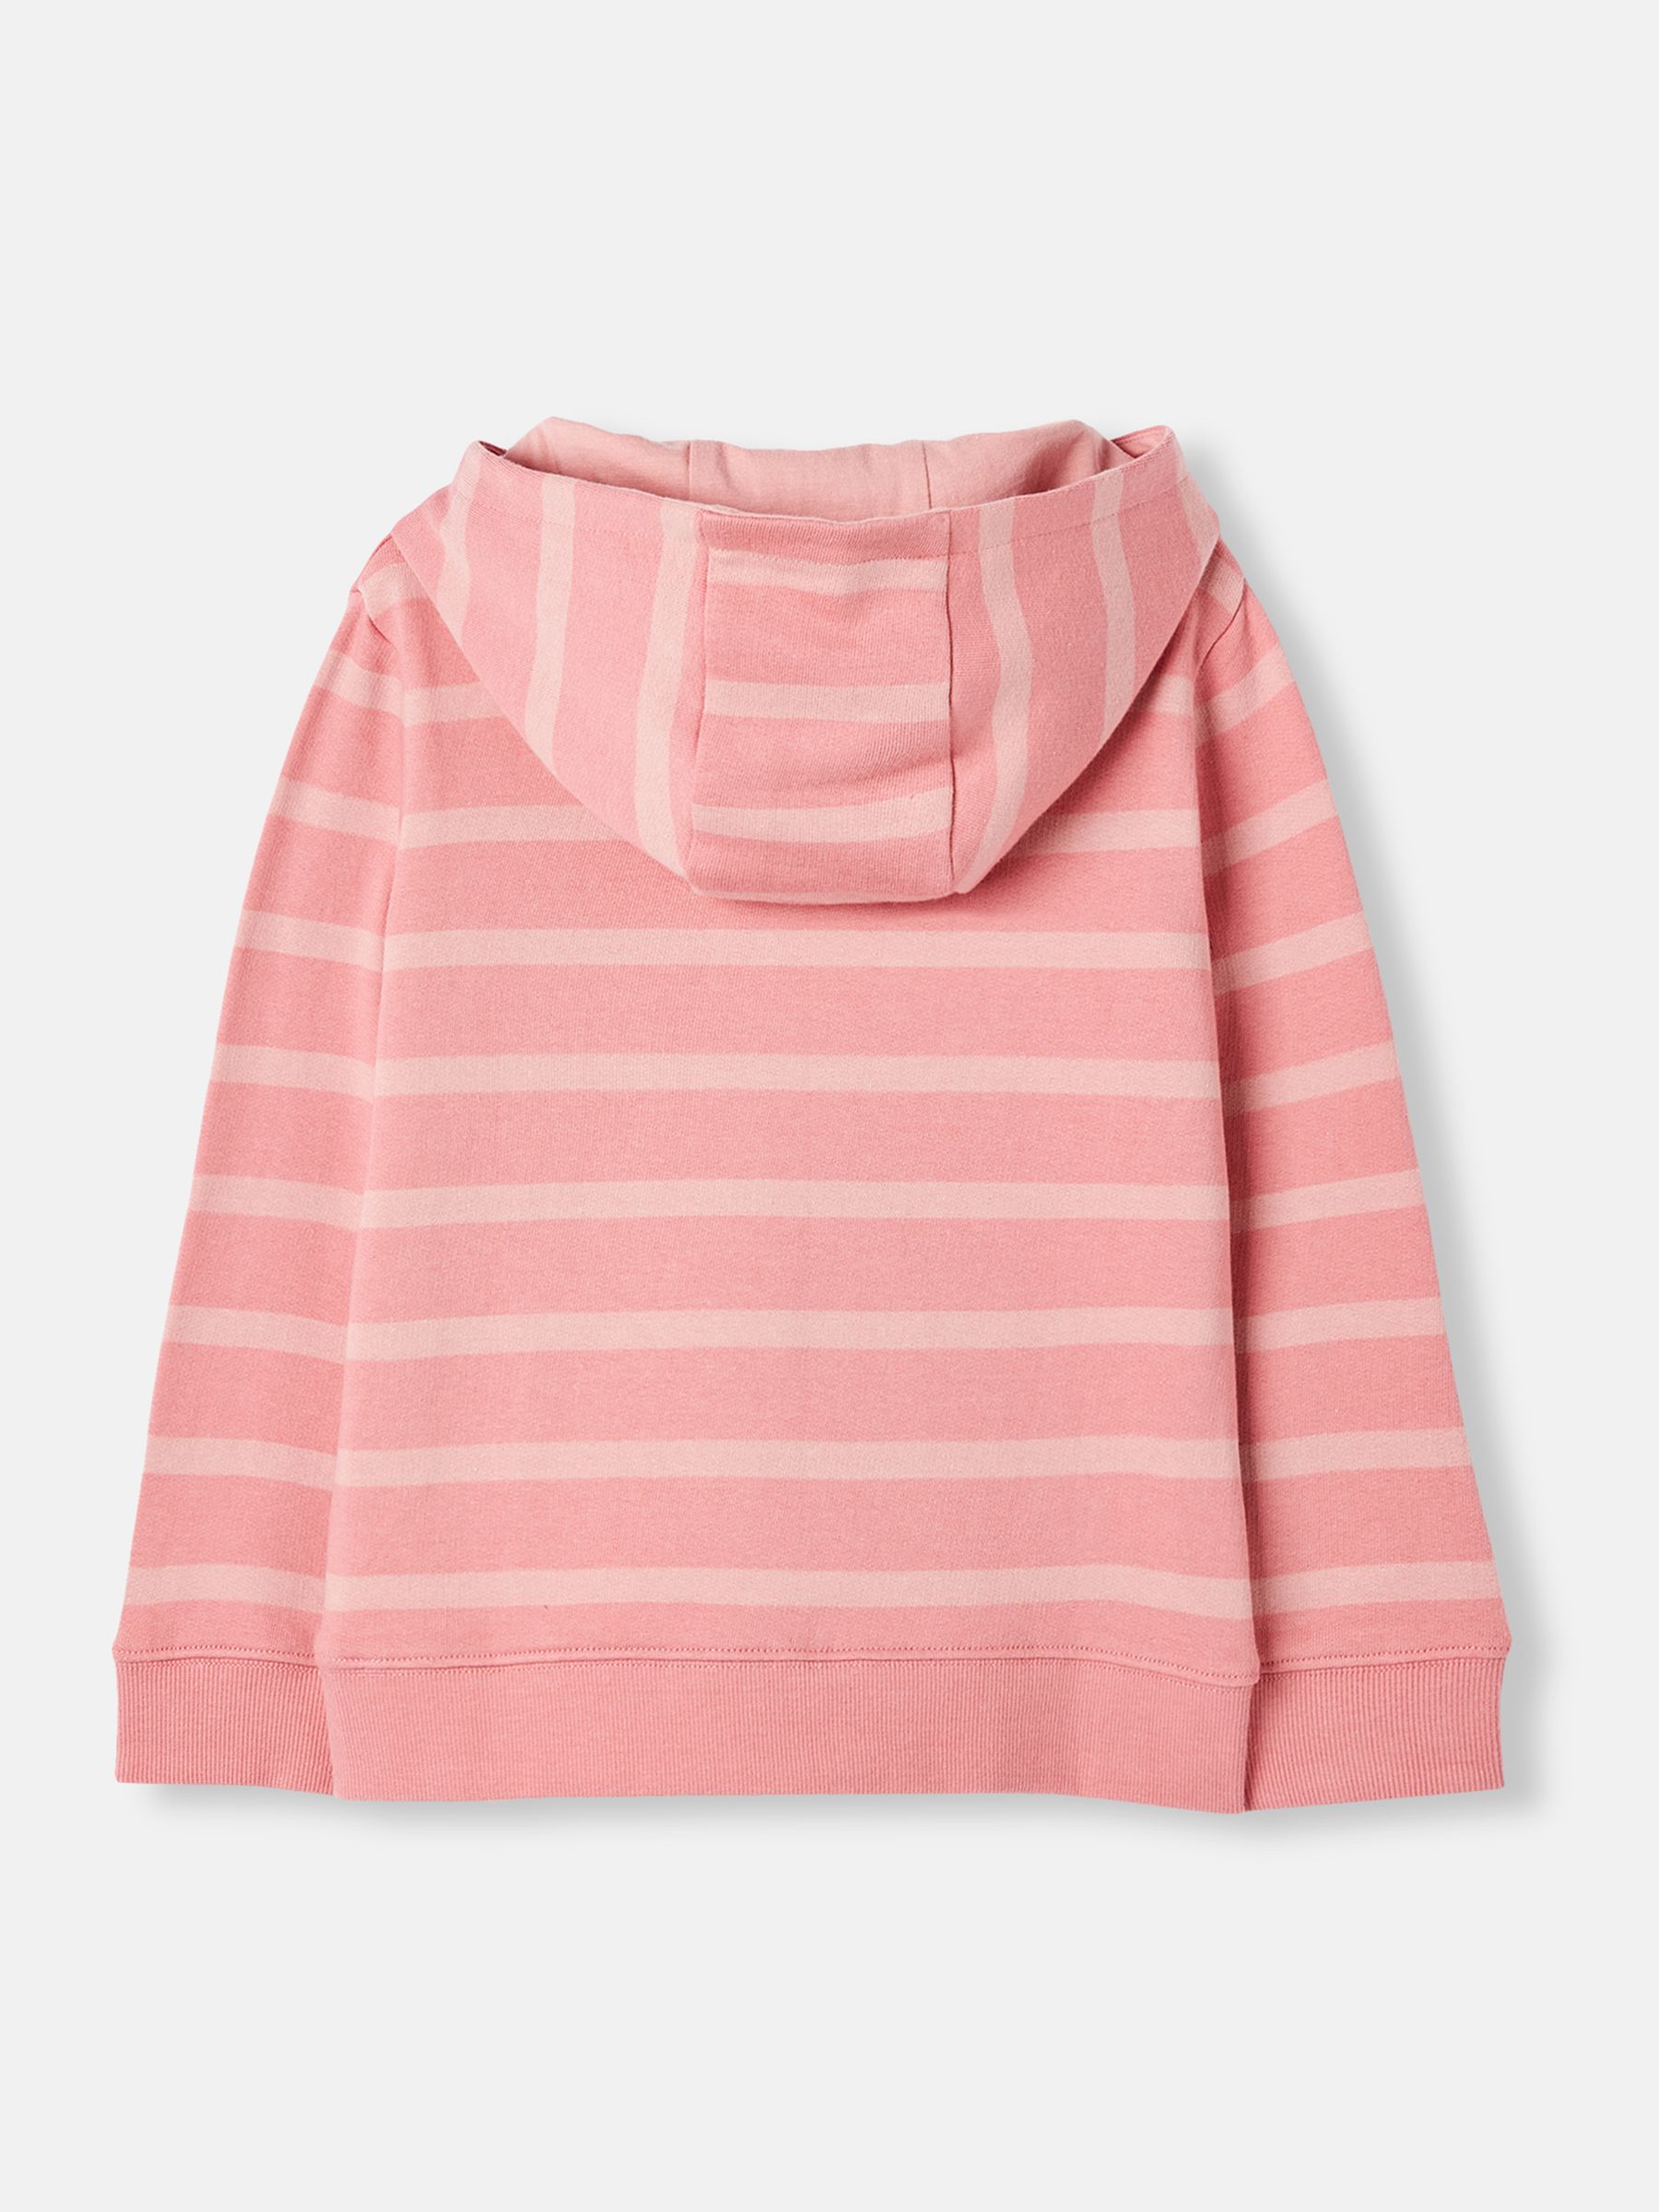 Buy Joules Burlton Striped Hoodie from the Joules online shop